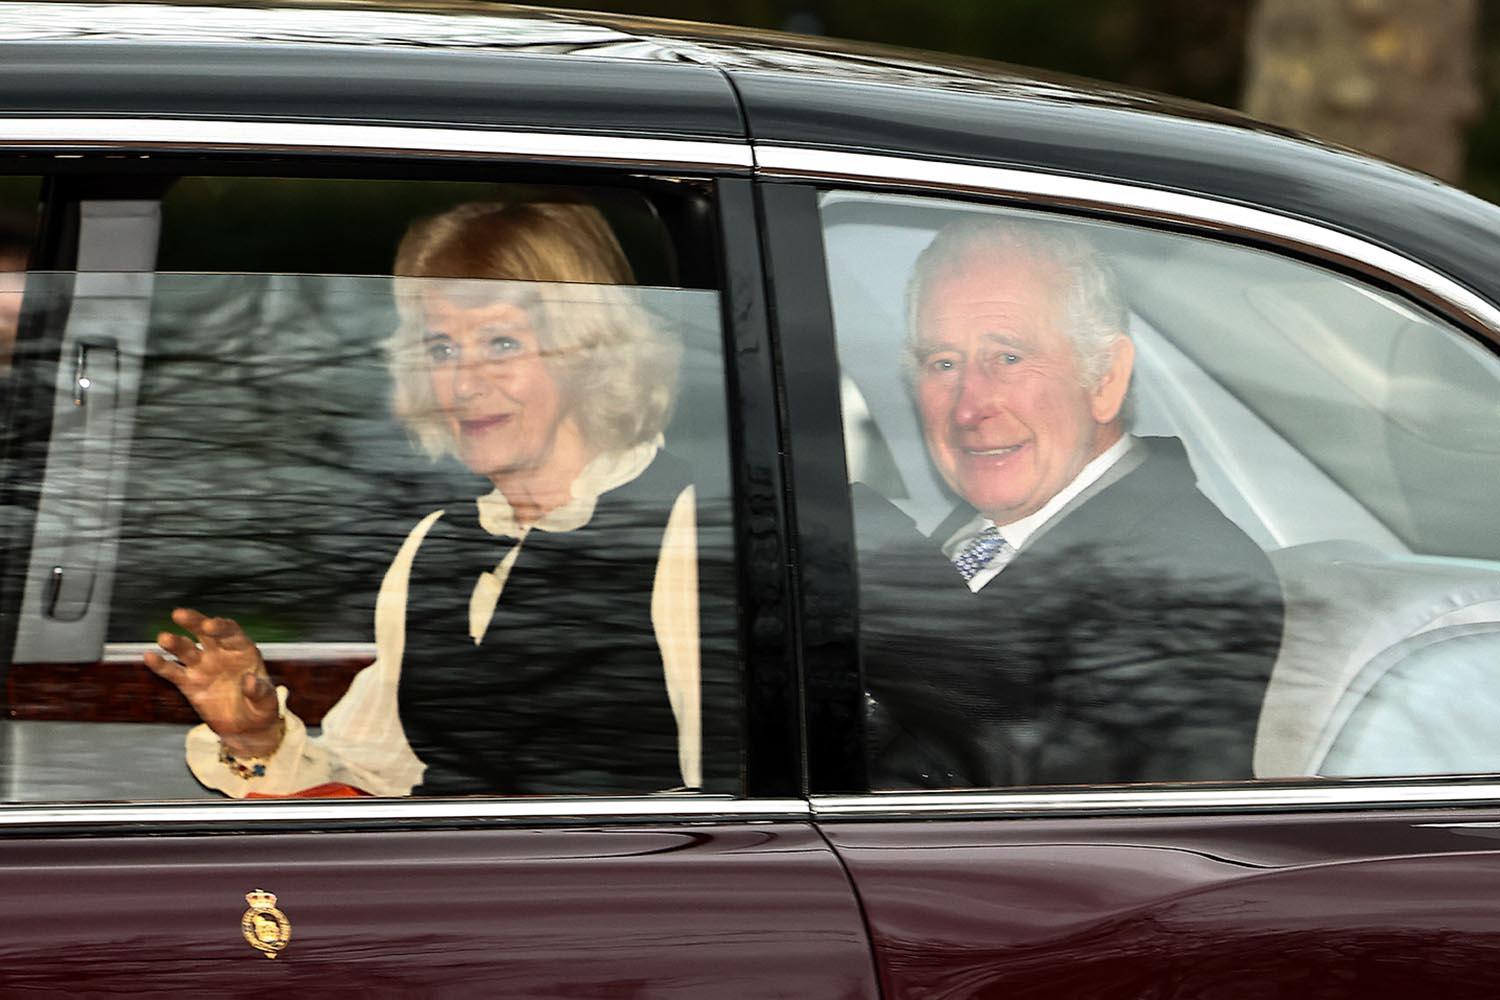 king-charles-seen-for-first-time-since-diagnosis-as-prince-harry-arrives-SPACEBAR-Hero.jpg